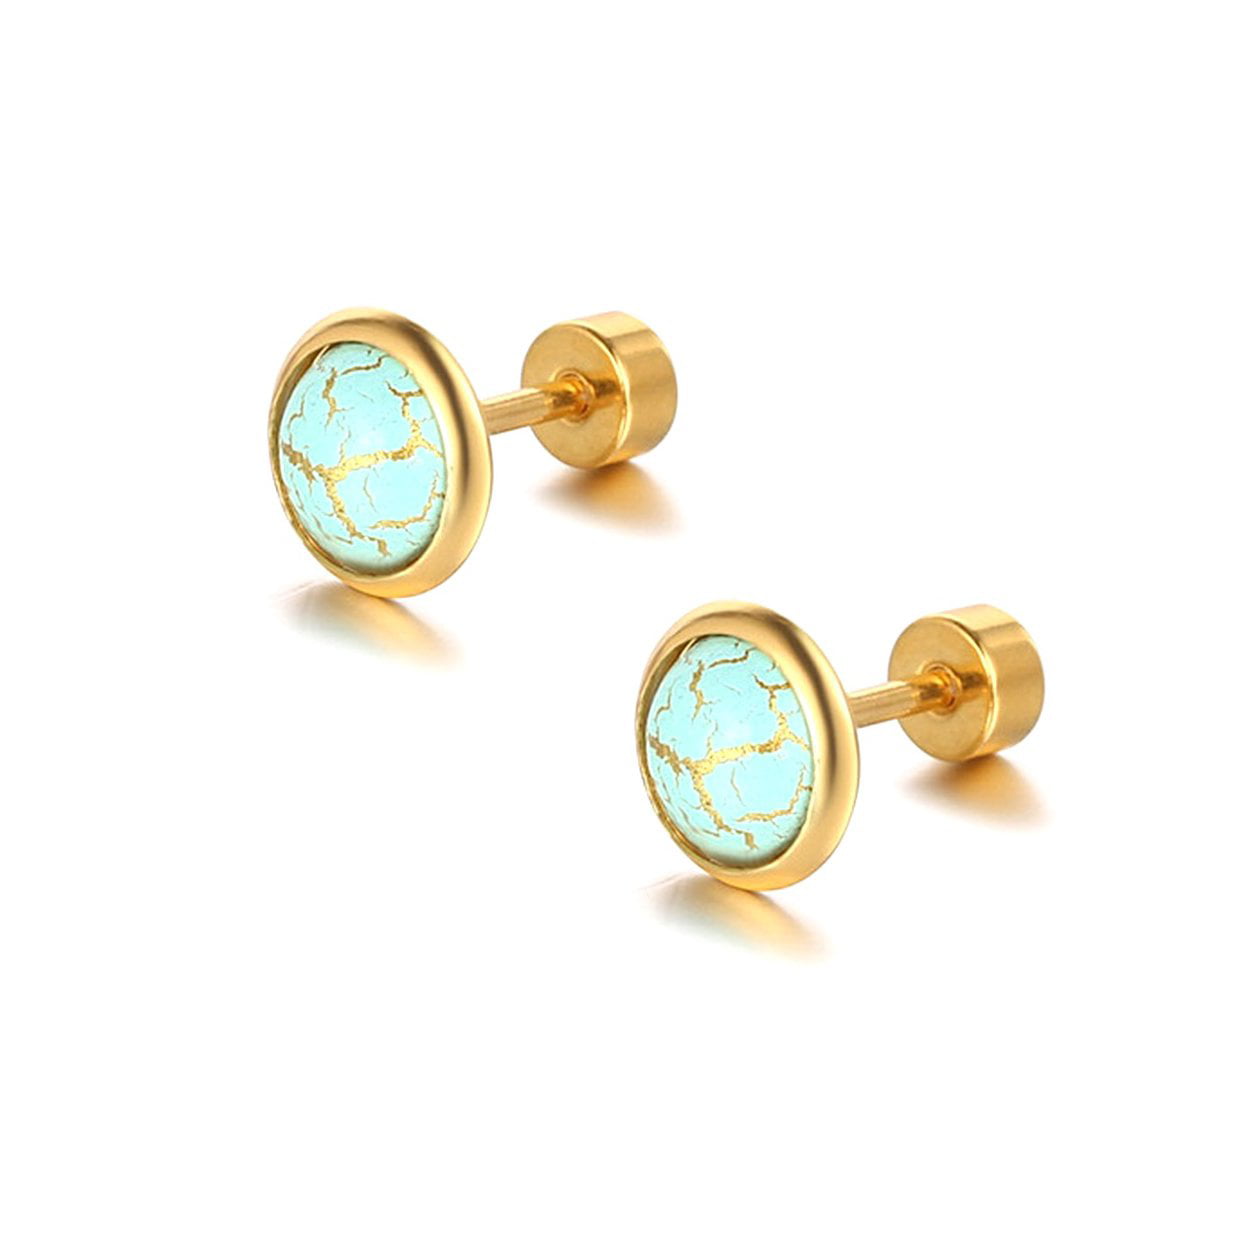 14K Solid Yellow Gold Black Enamel Inlayed Small Moon Screw back Earrings. 